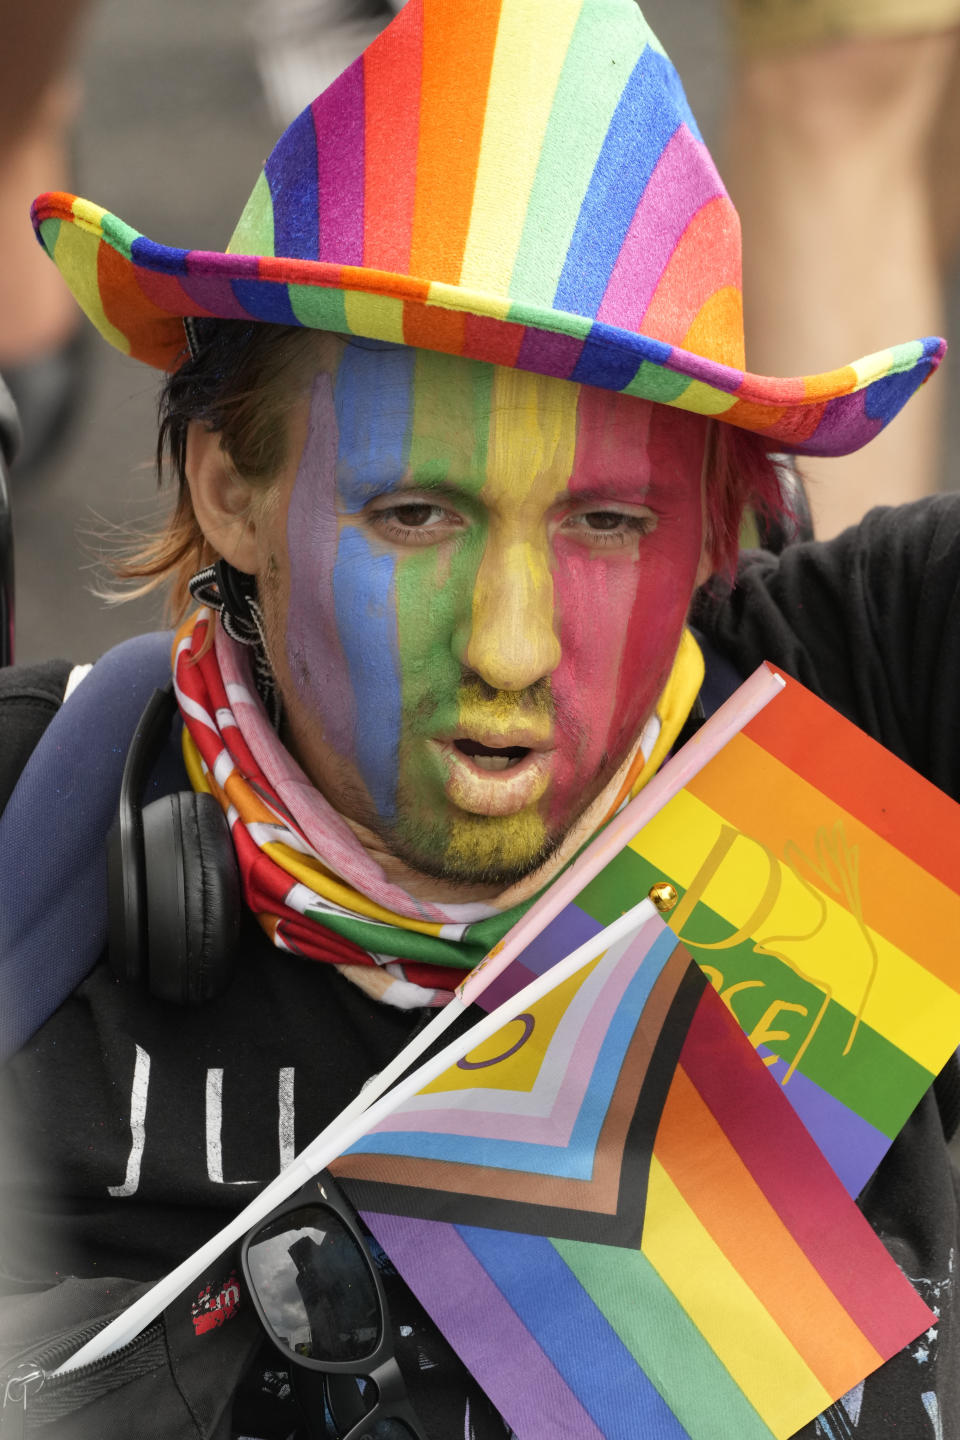 A man takes part in the yearly pride parade, known as the Equality Parade, in Warsaw, Poland, on Saturday, June 17, 2023. (AP Photo/Czarek Sokolowski)